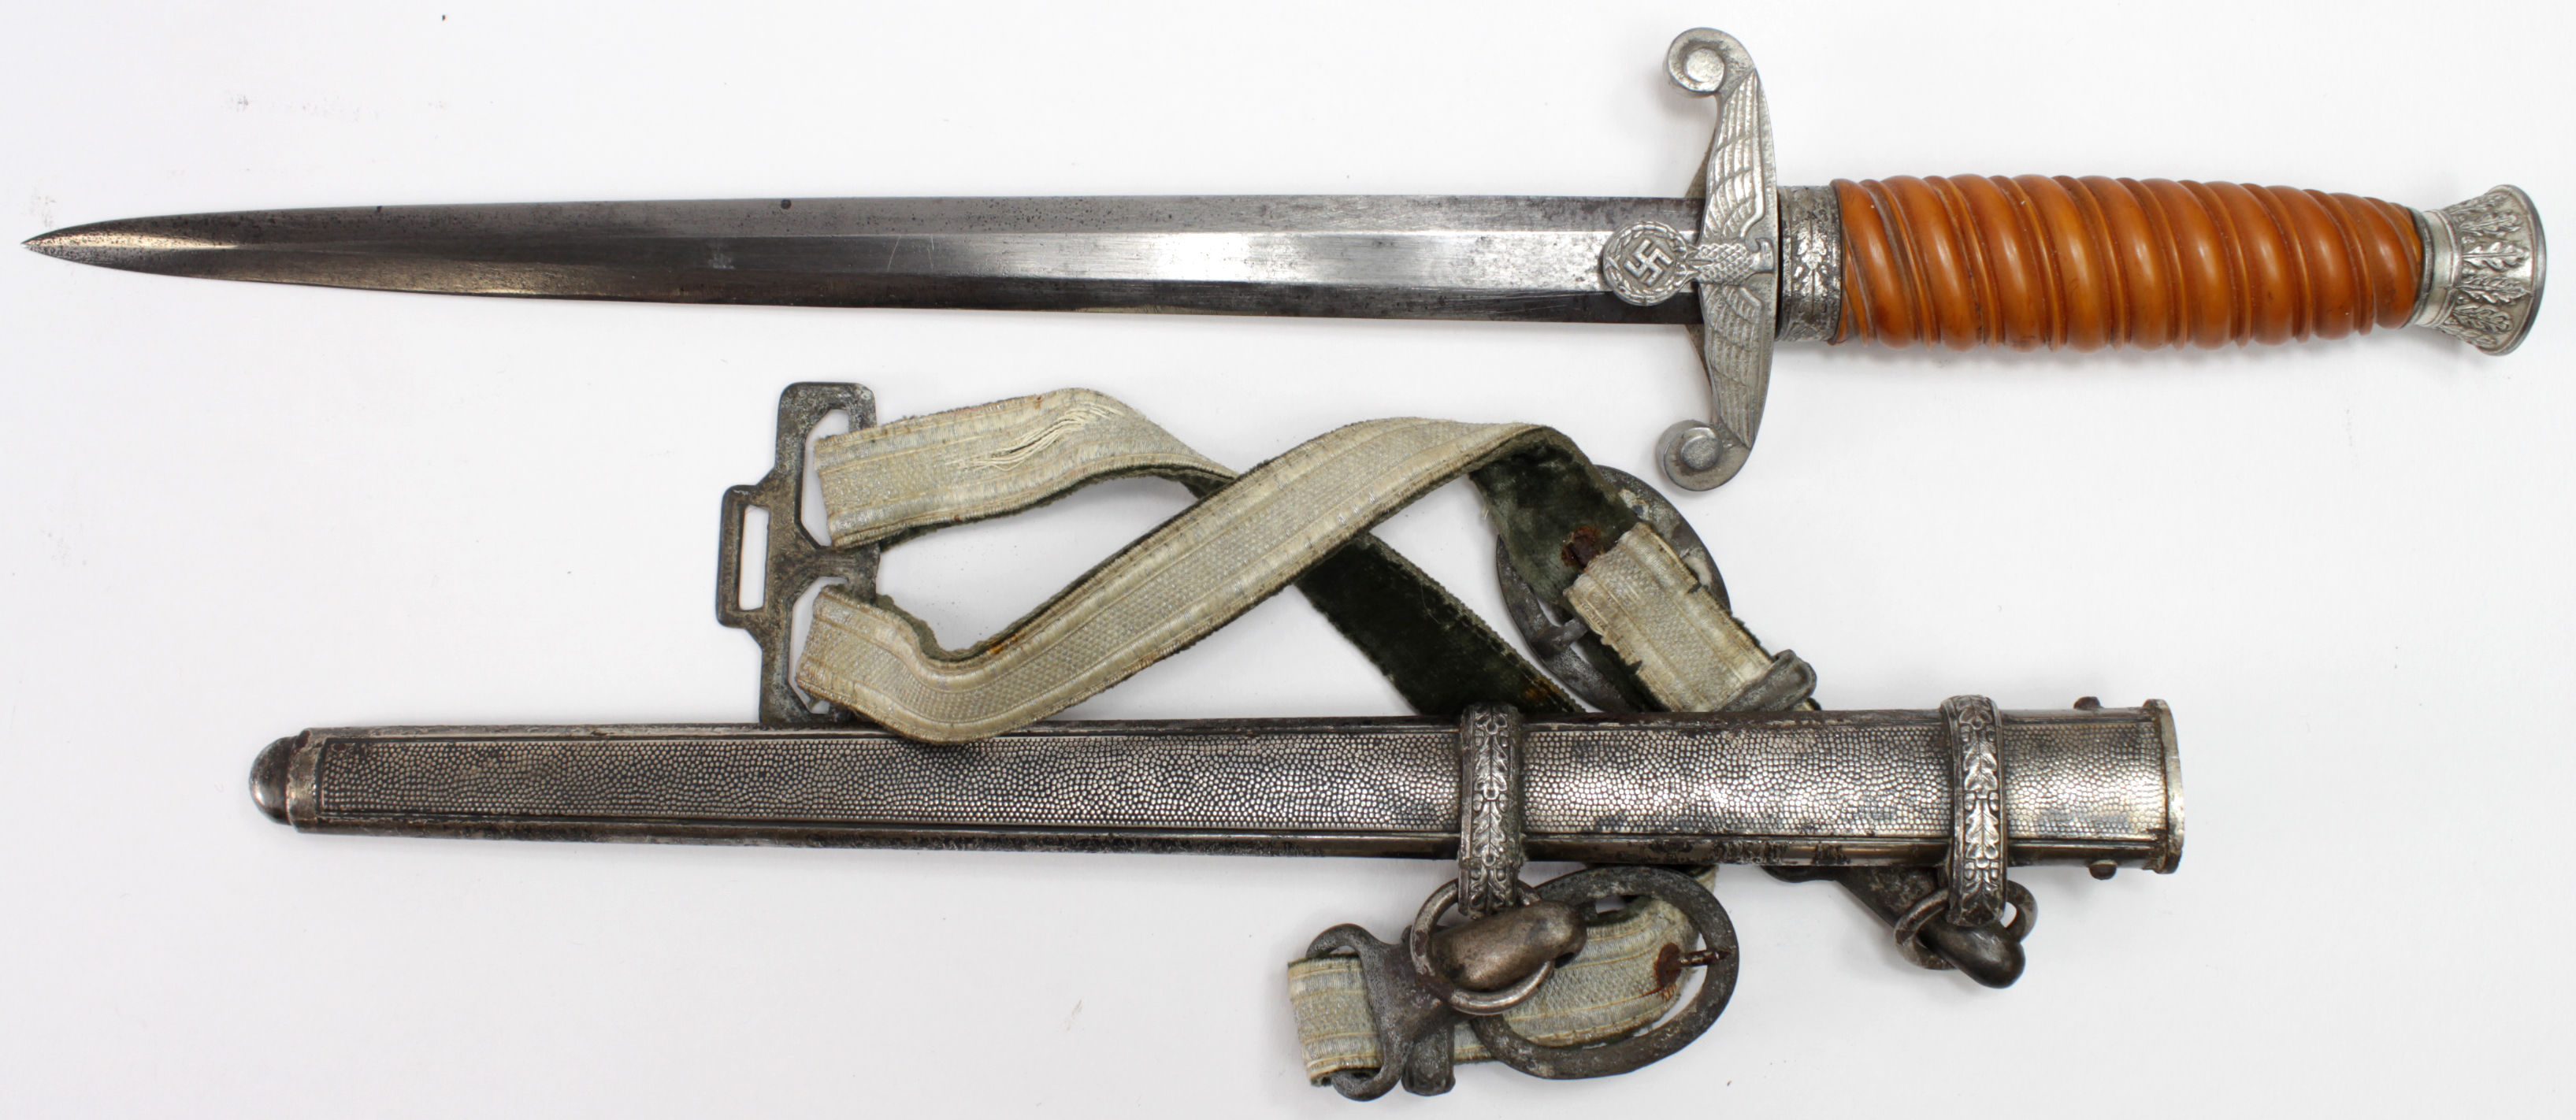 German Army dress dagger with hangers, Puma maker marked blade, old toning in places, sold as seen